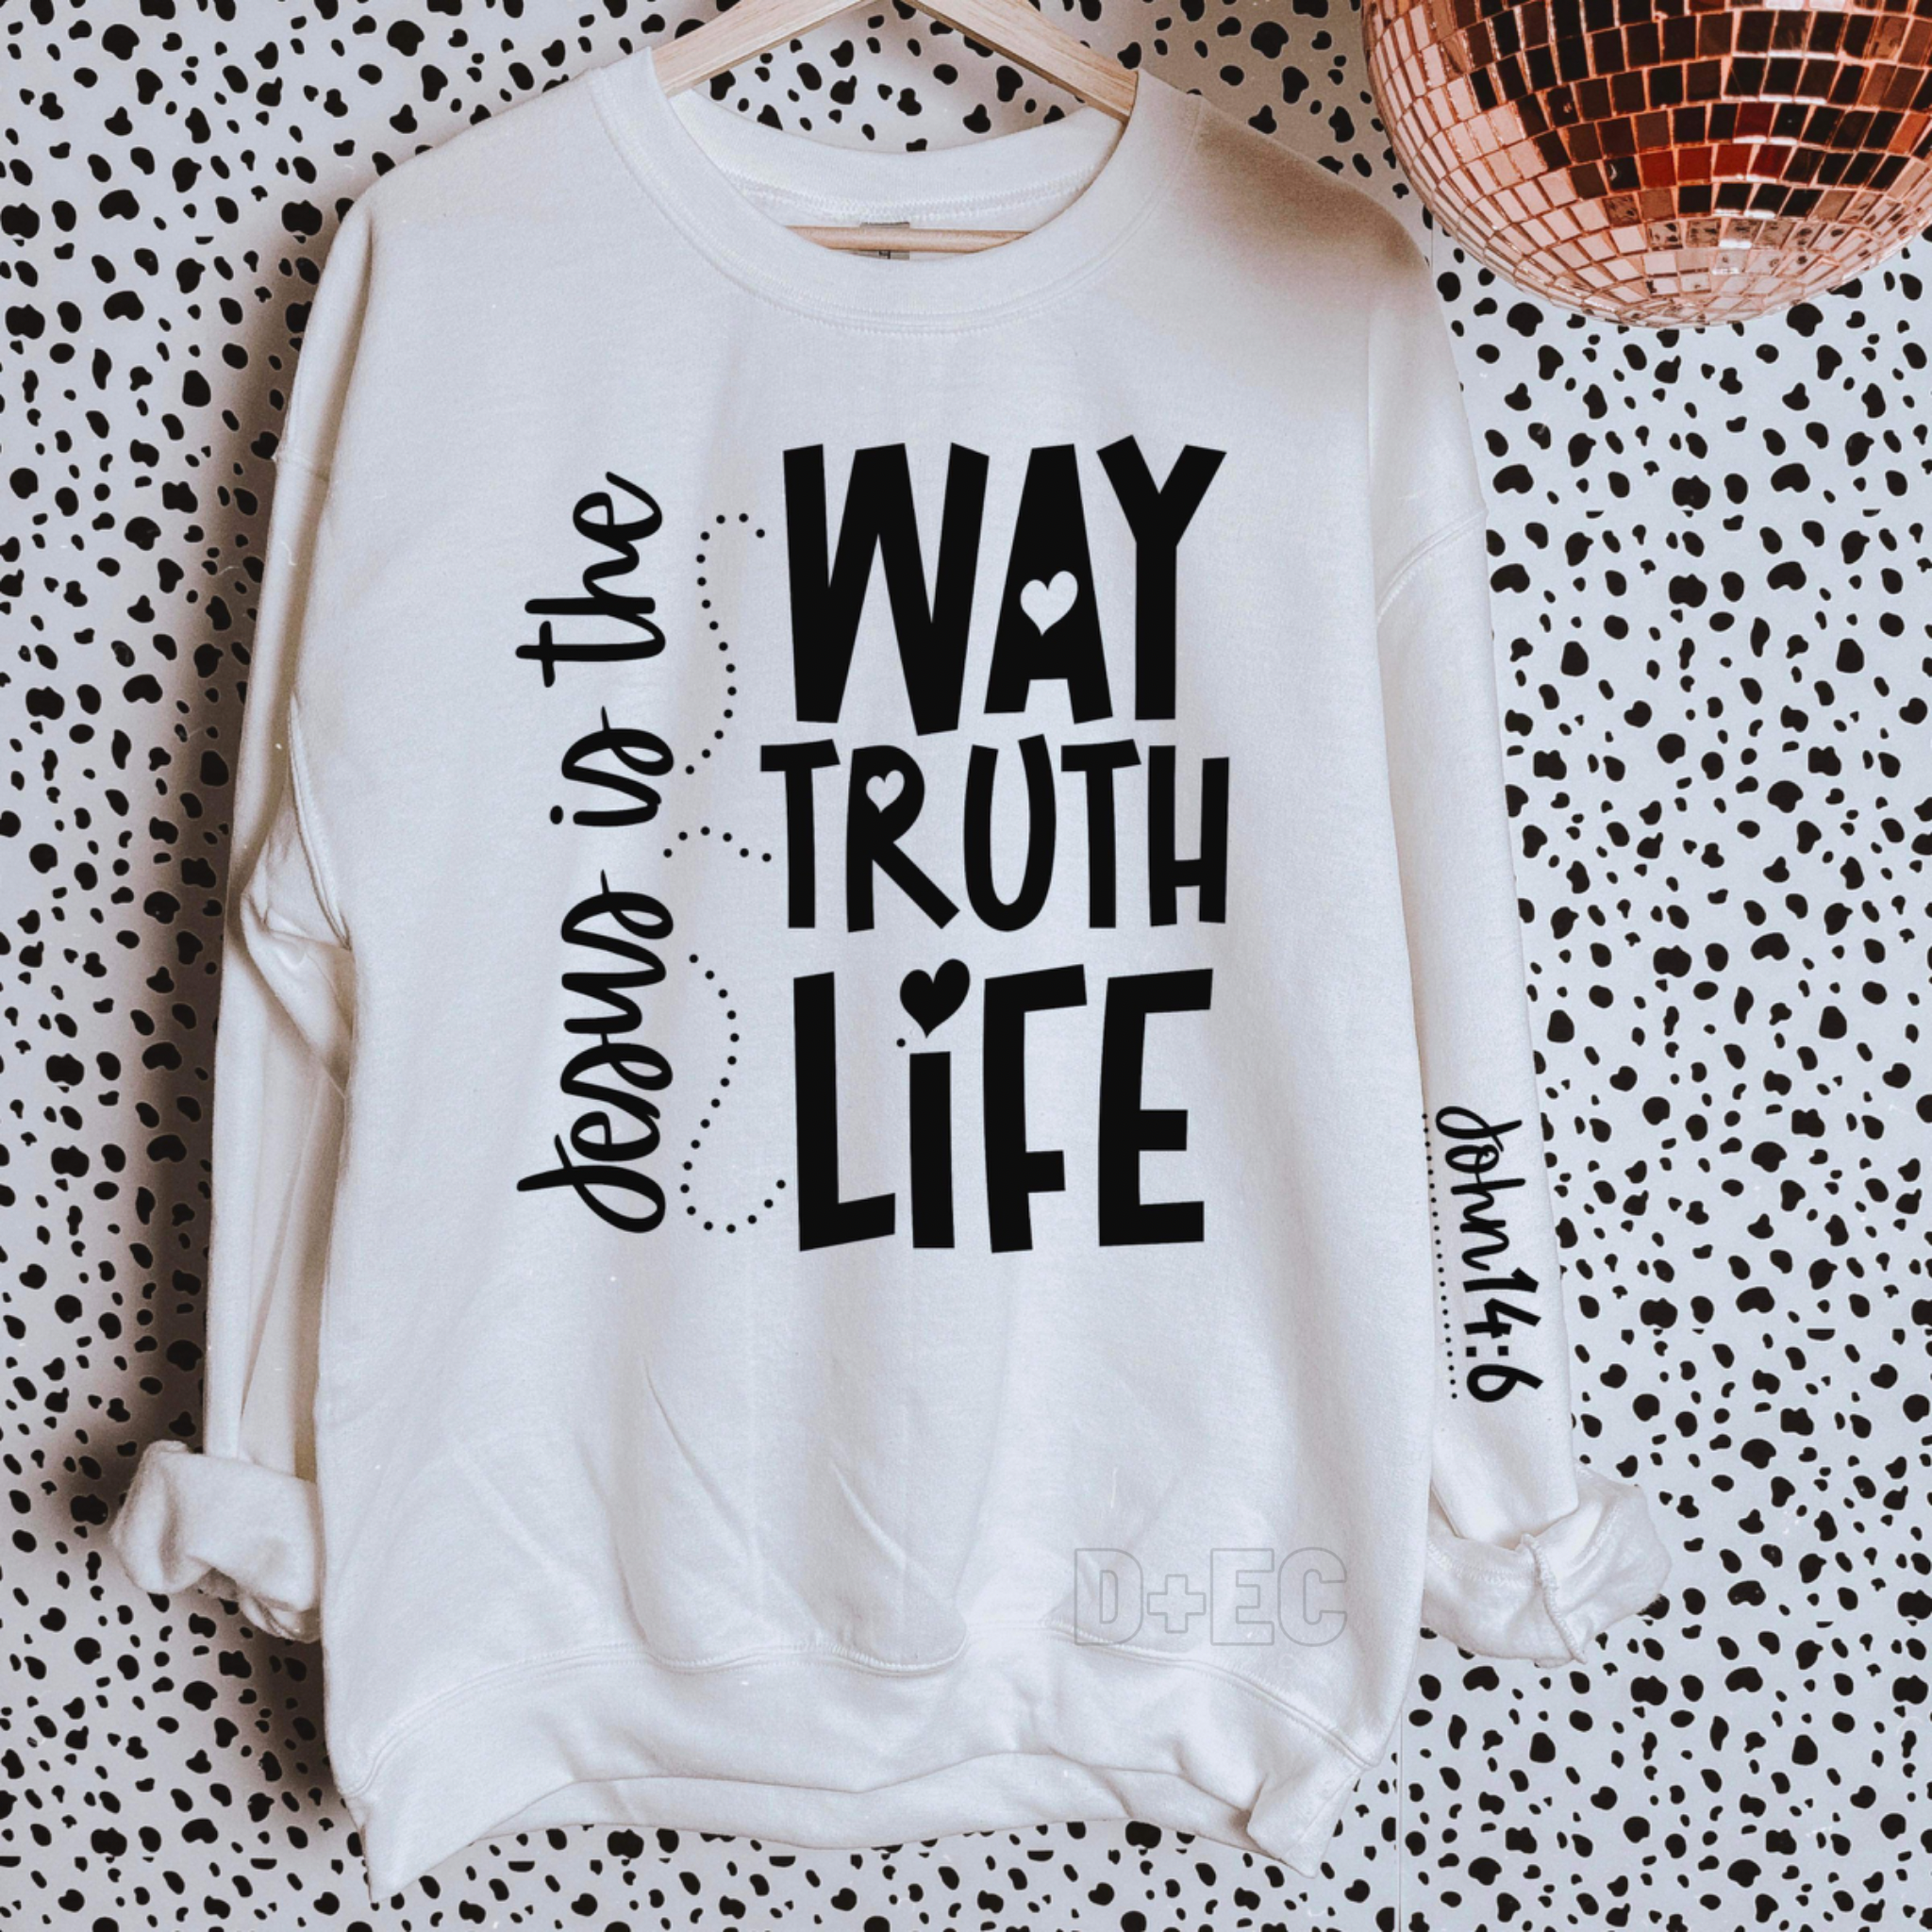 Jesus is the way truth life-Completed Sweatshirt